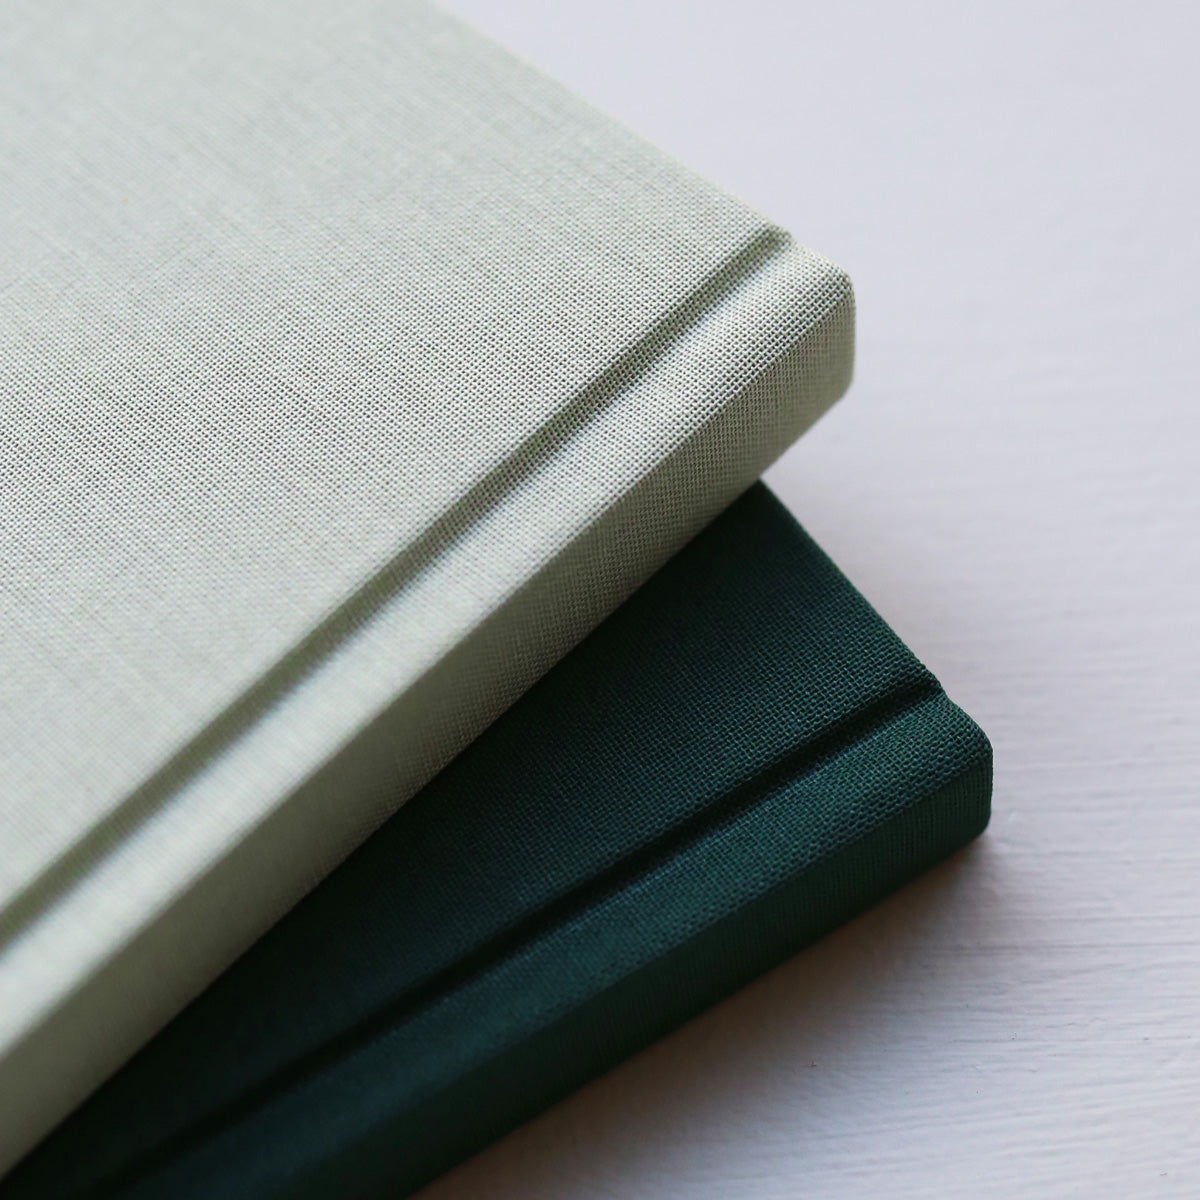 NOTES HARDCOVER NOTEBOOK // BOTTLE GREEN